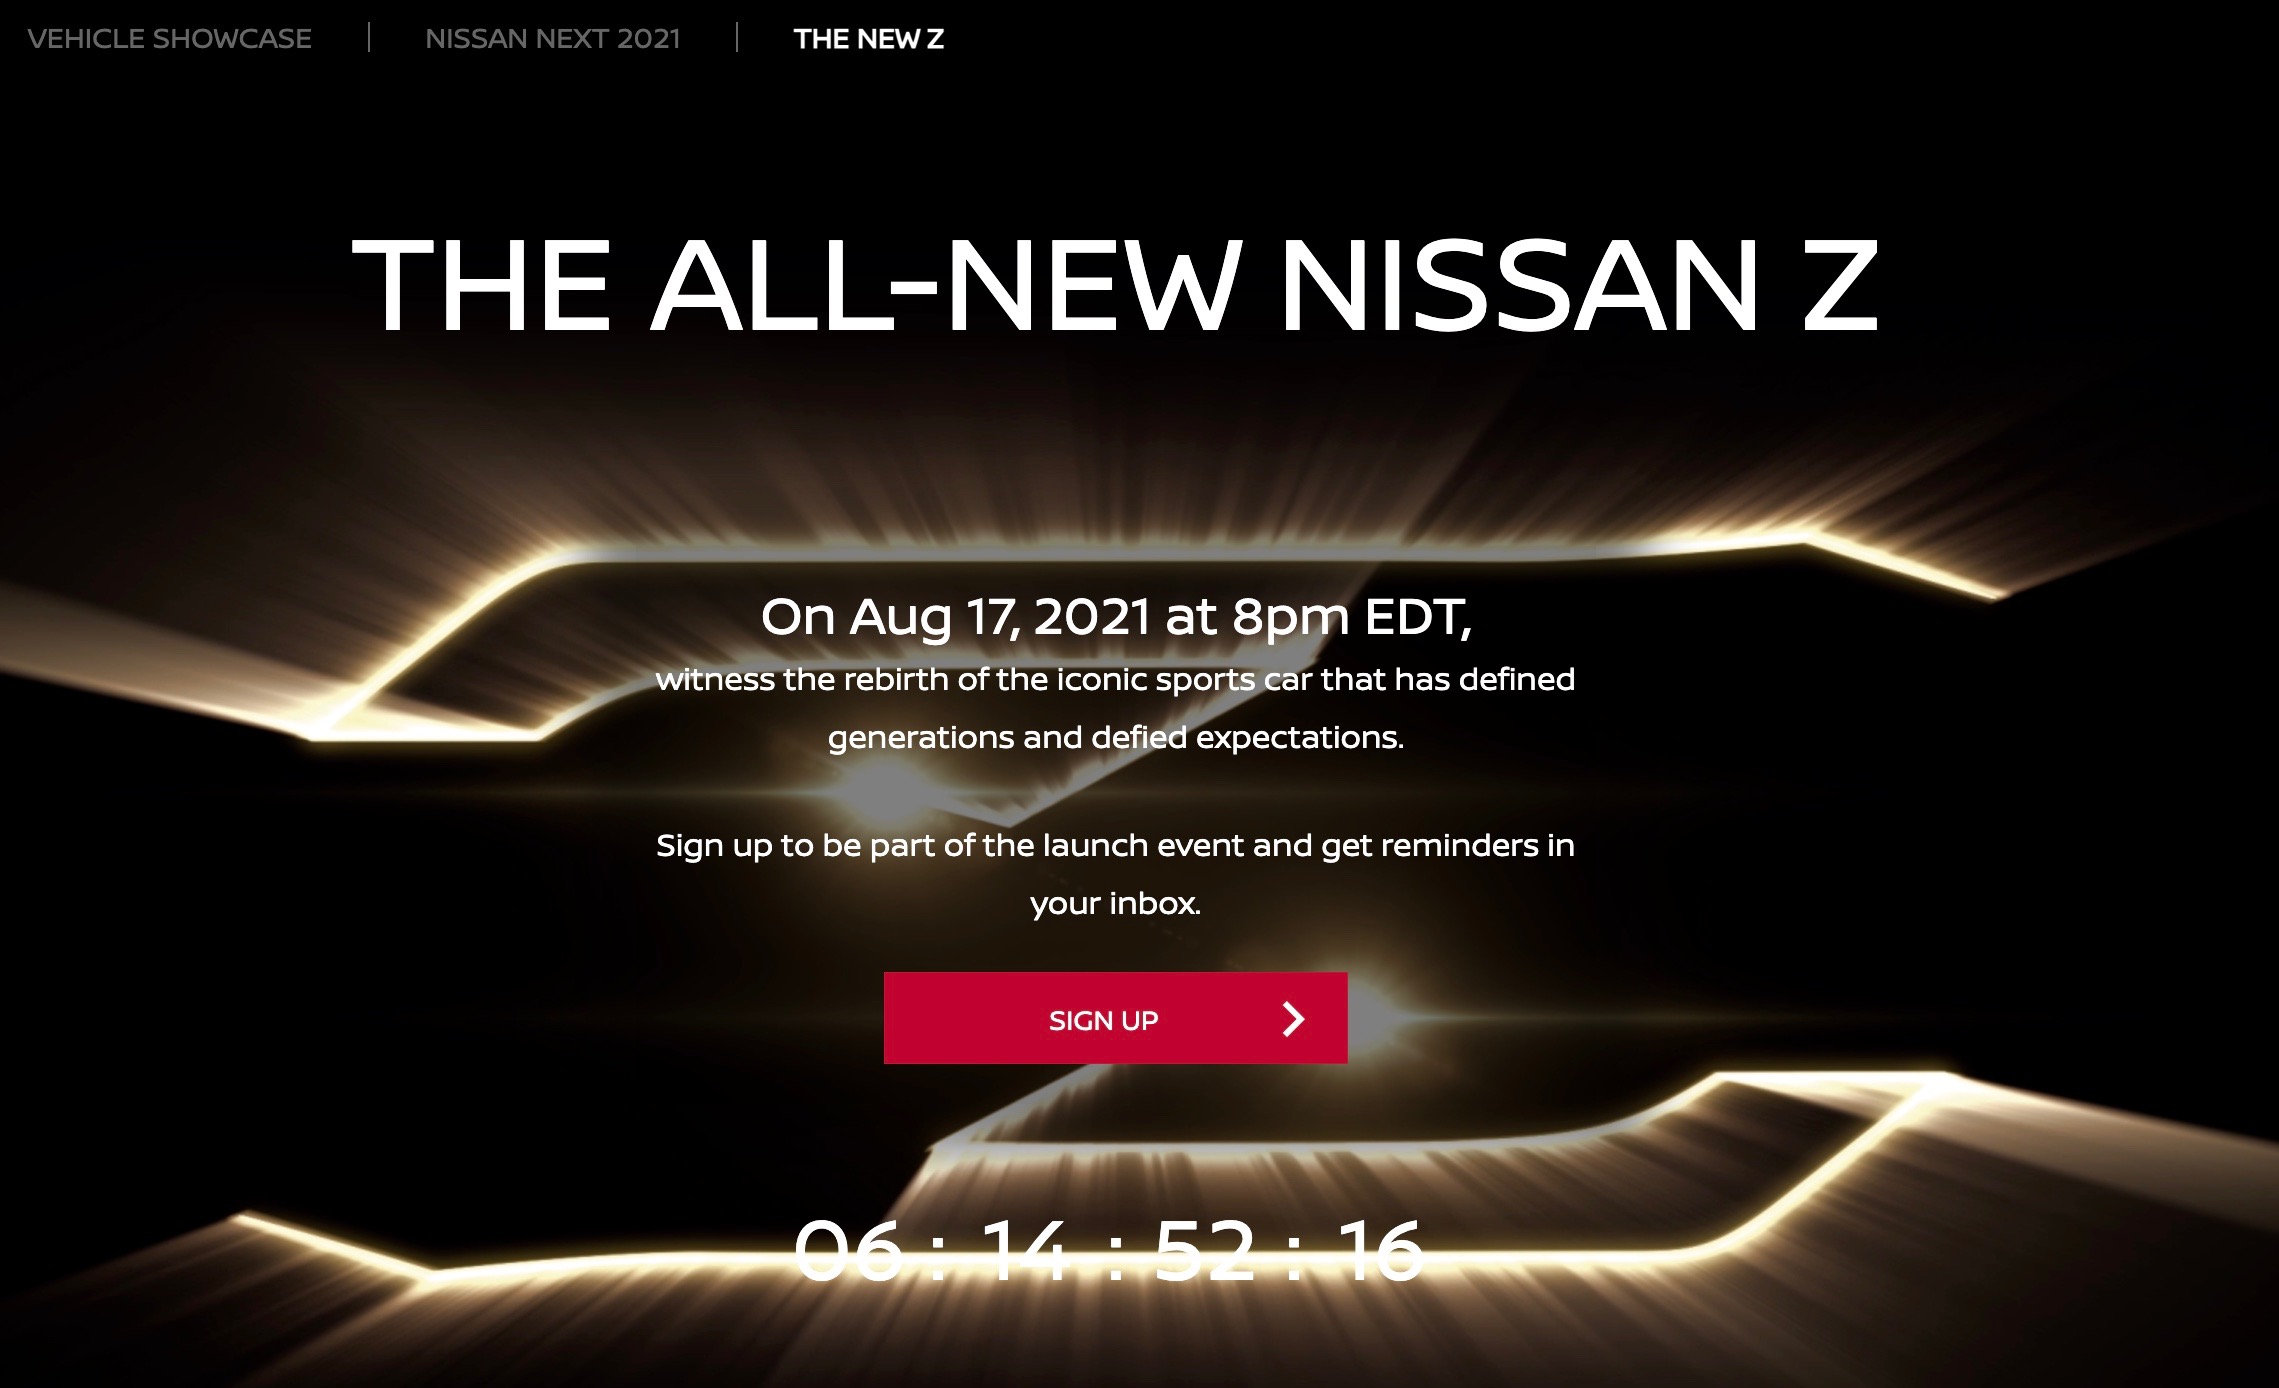 Confirmed: 2022 Nissan Z car will be revealed on August 17